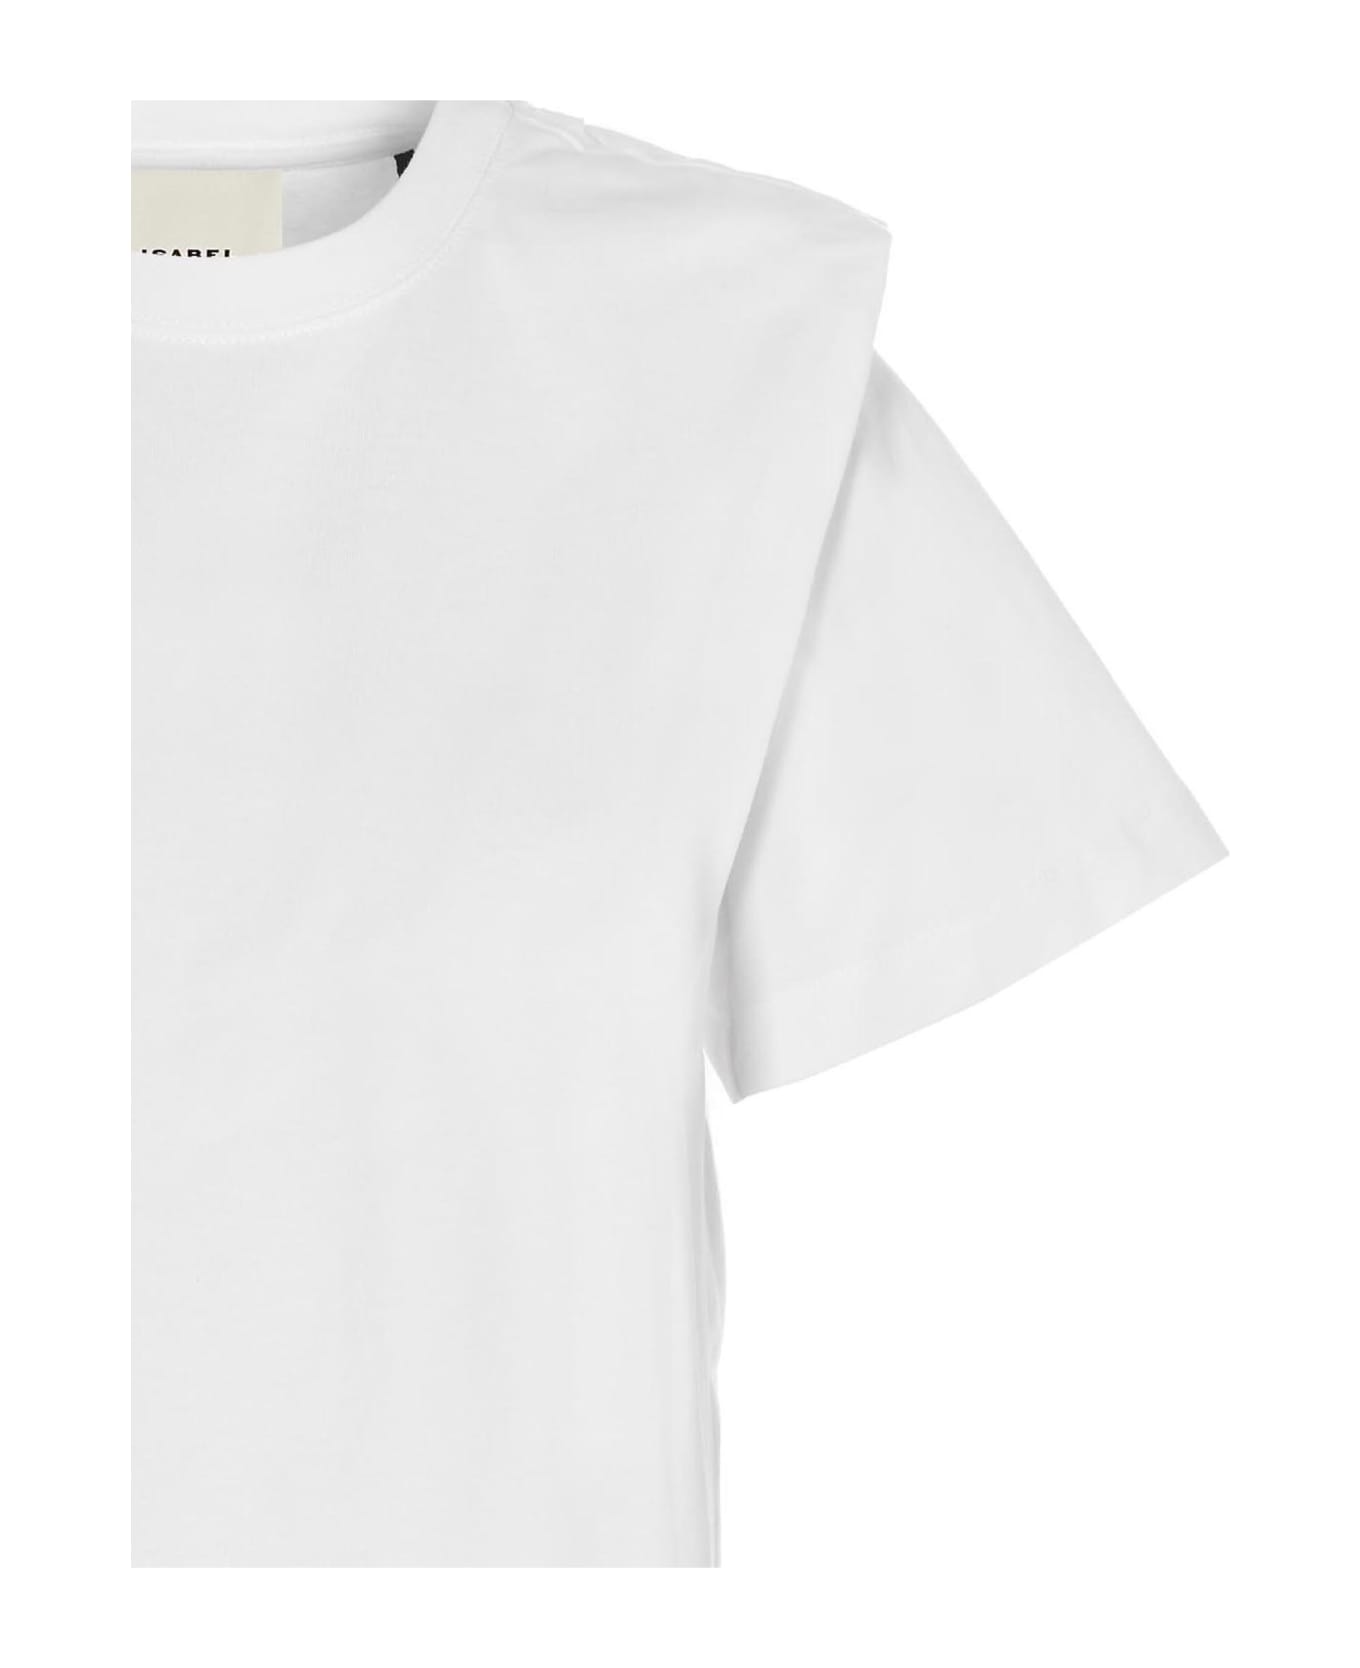 Isabel Marant Cropped T-shirt - WHITE Tシャツ